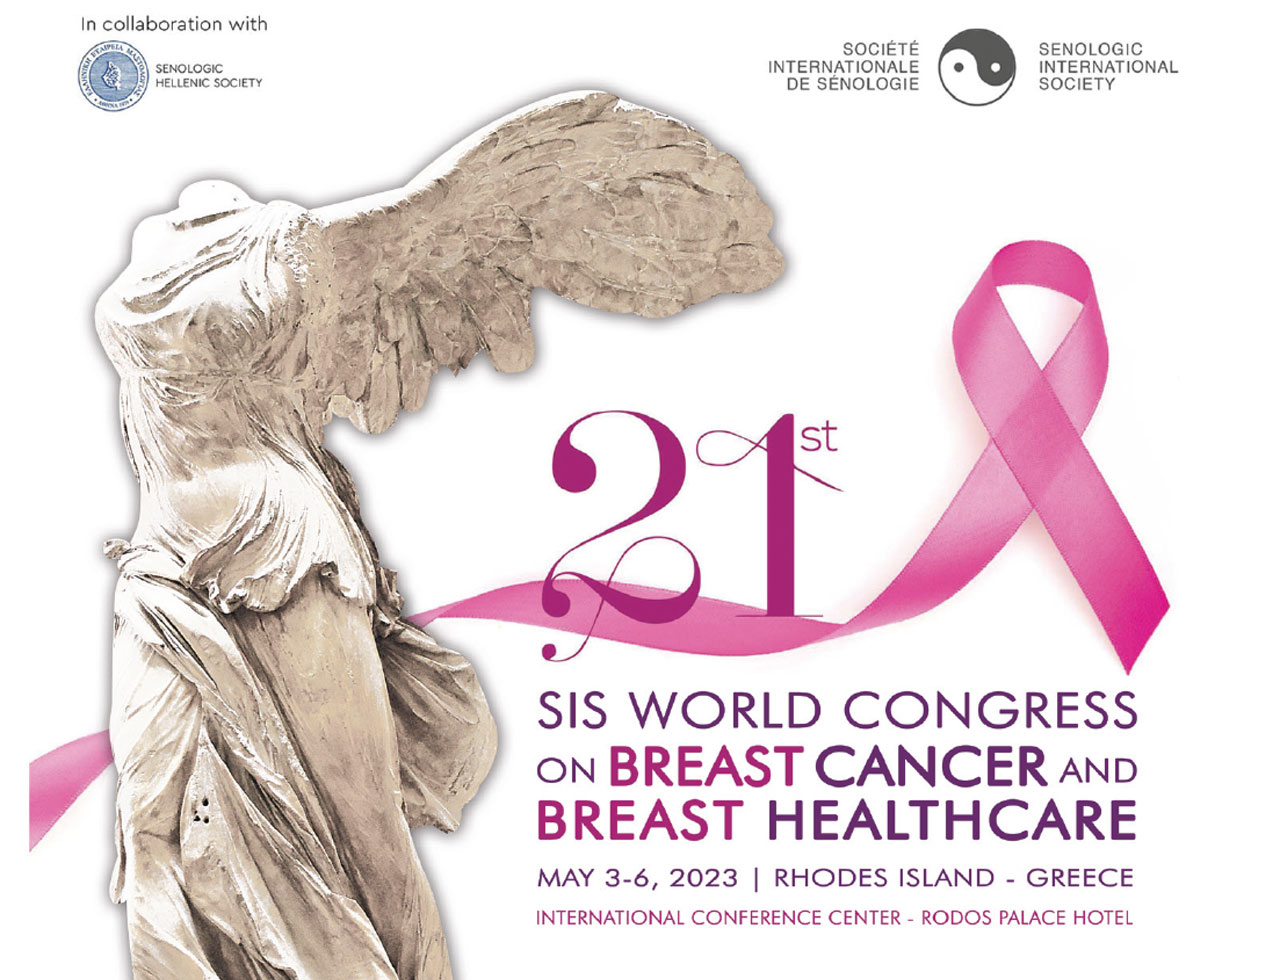 21st SIS World Congress on Breast Cancer & Breast Healthcare on May 3-6 2023